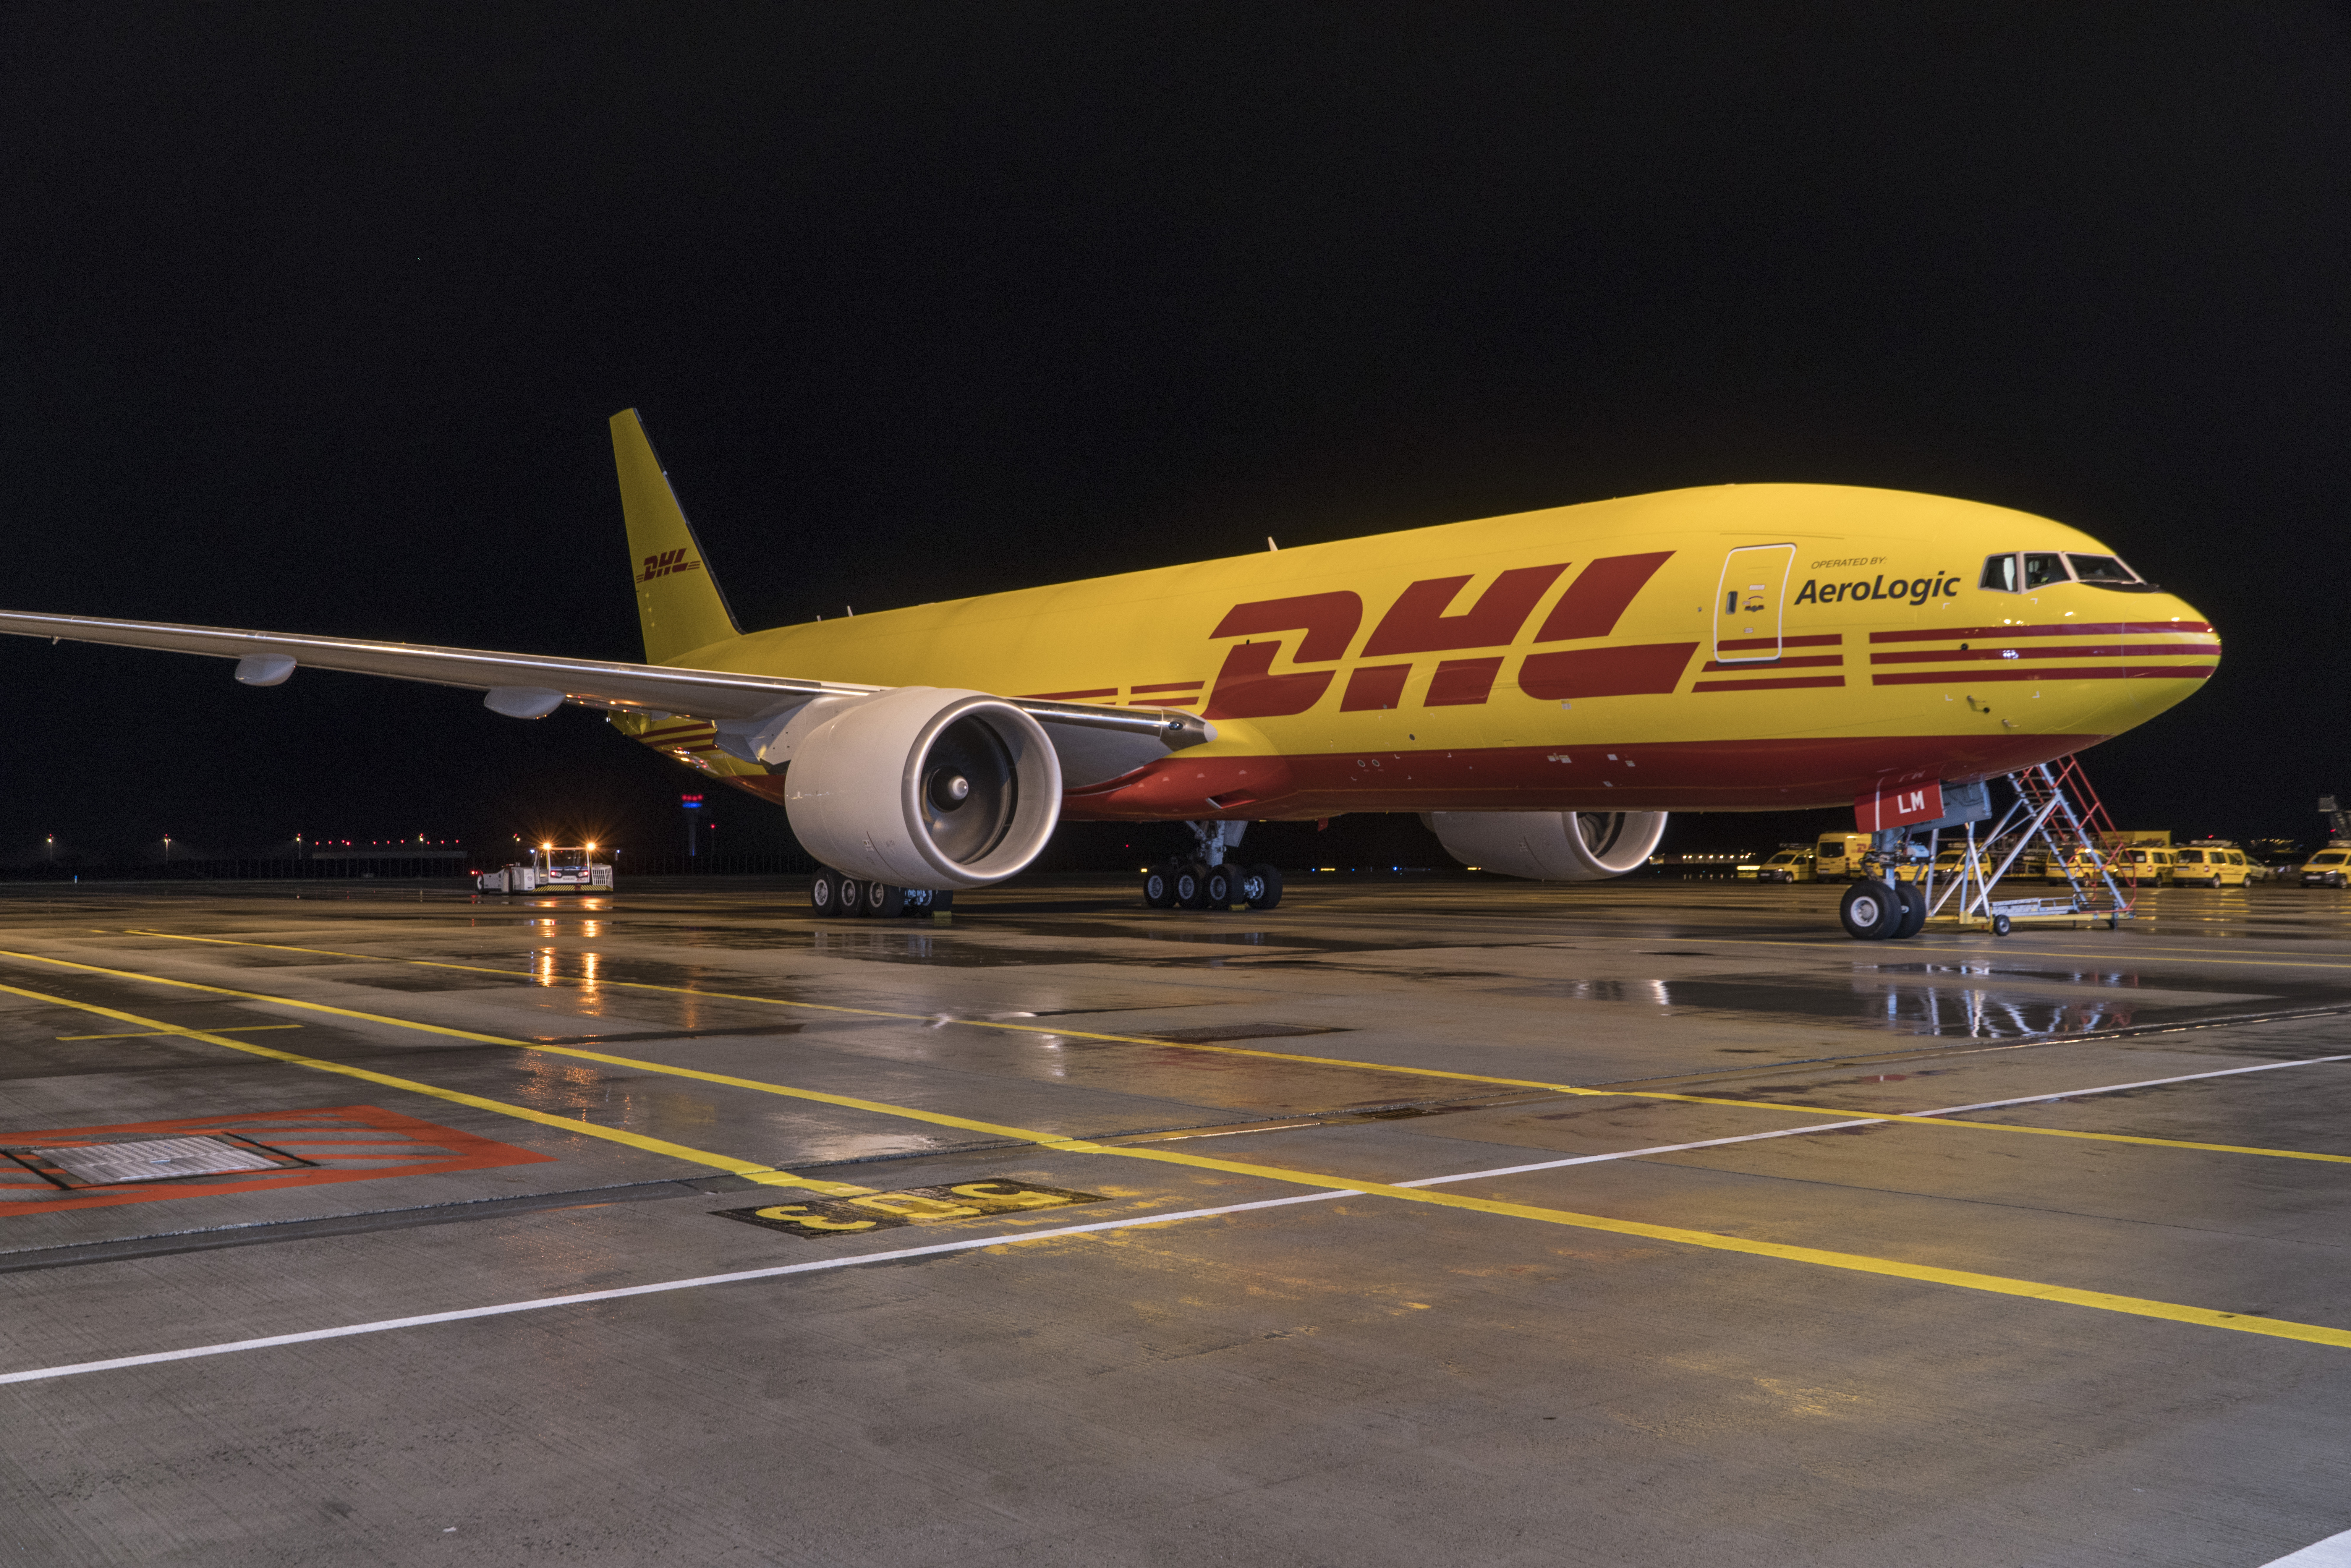 Boeing completes initial DHL 777F order